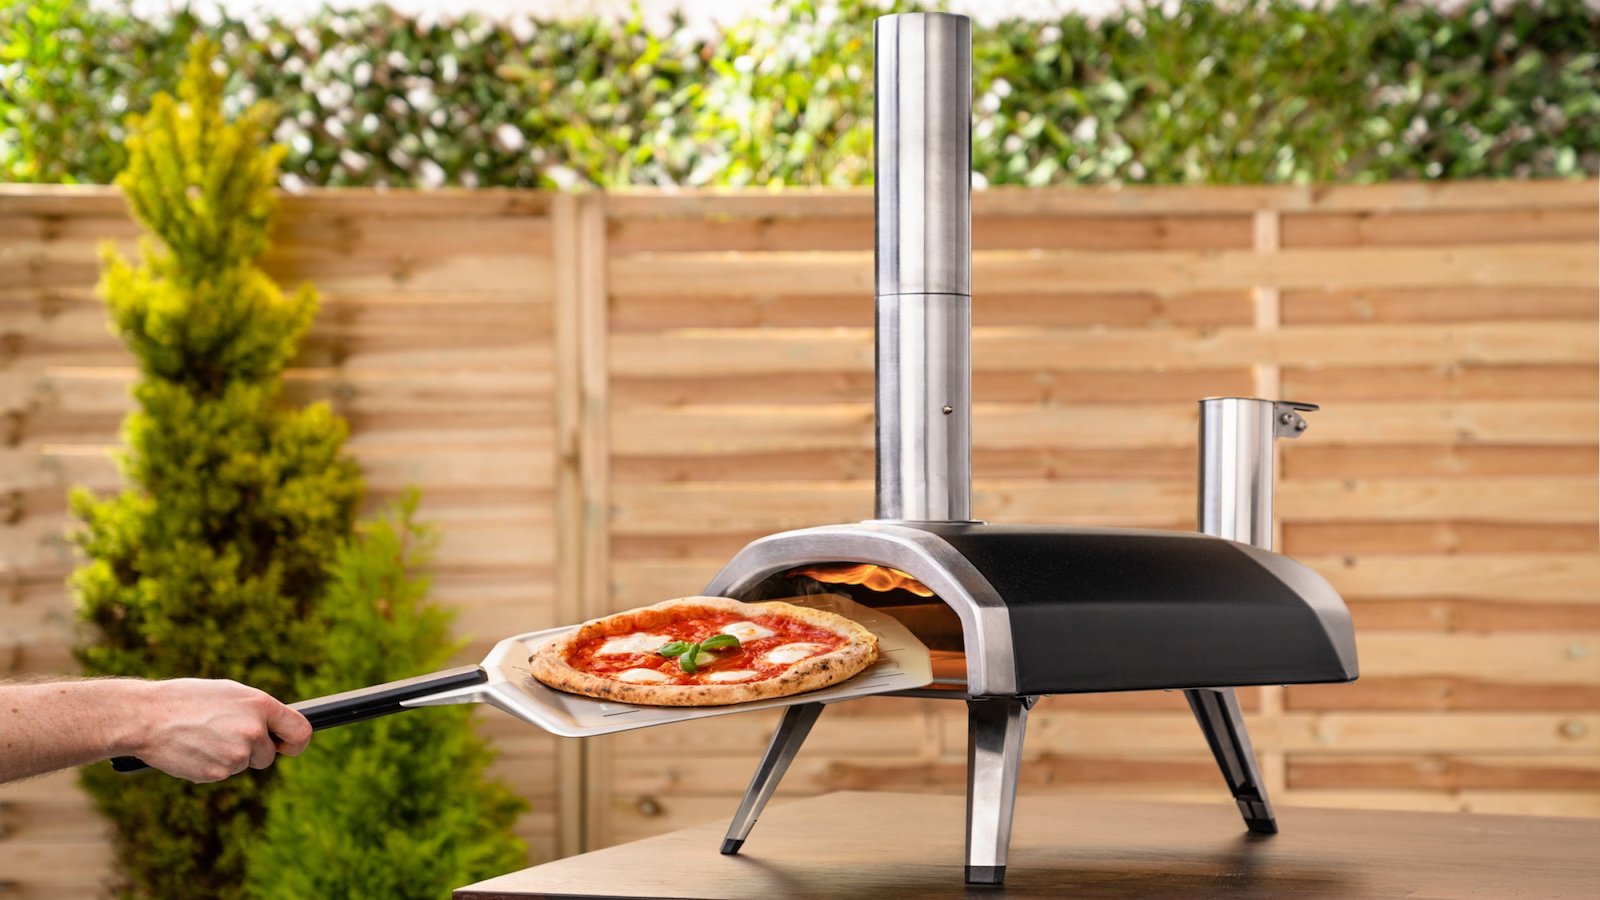 Pizza accessories and ovens to enjoy a hot dish with friends indoors or  outdoors » Gadget Flow